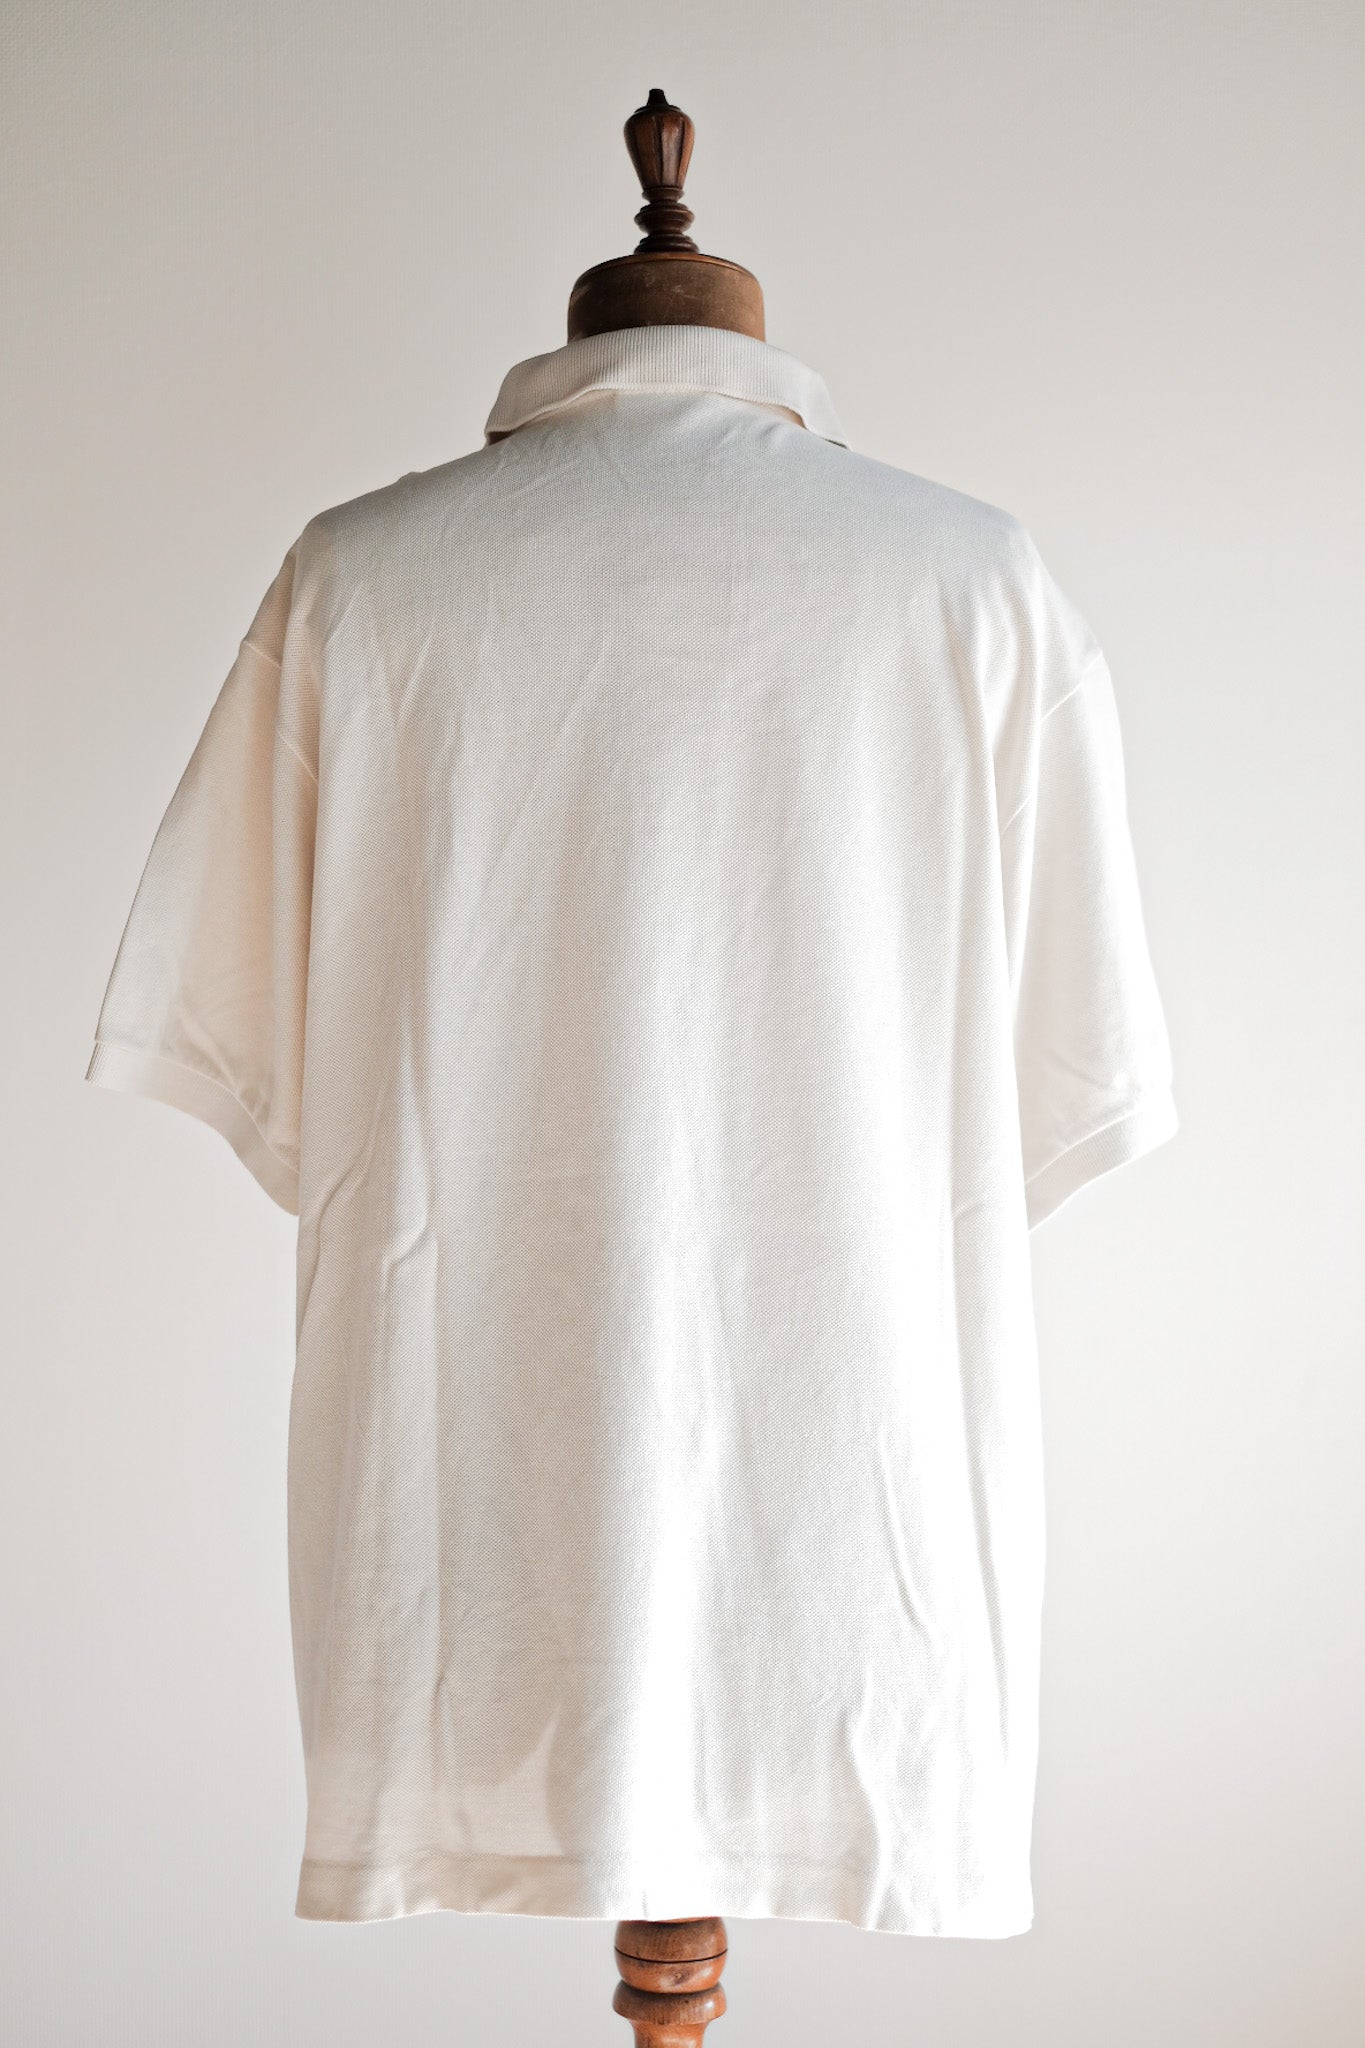 [~ 80's] Chemise Lacoste S / S Polo Sirt Taille.7 "ECRU"